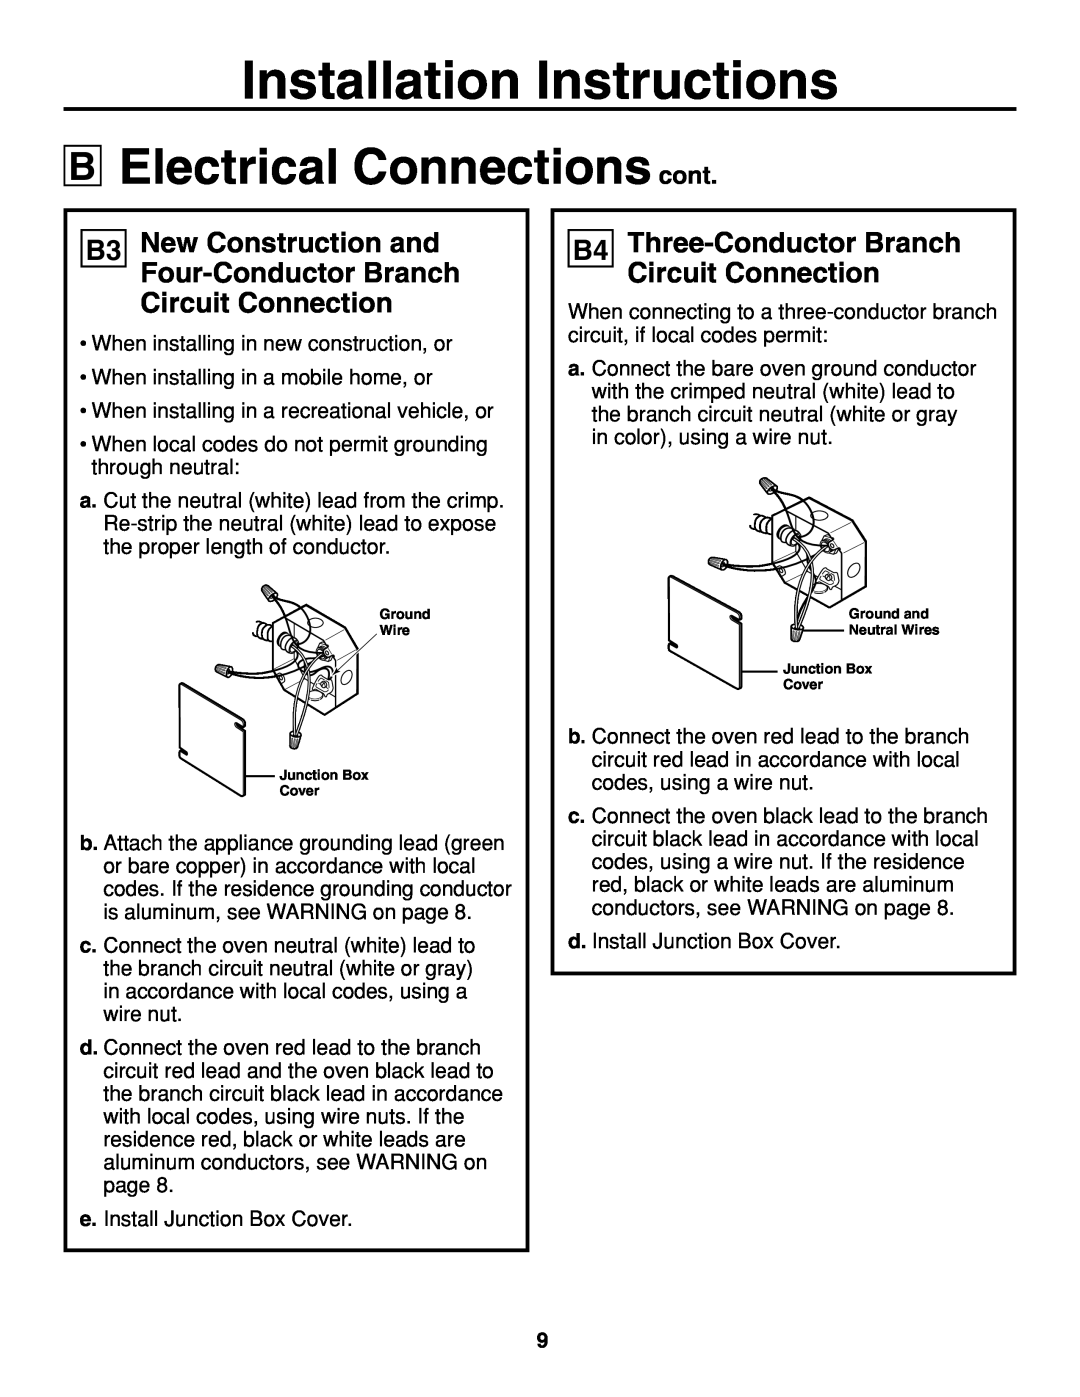 GE JTP20 Electrical Connections cont, B3 New Construction and Four-Conductor Branch Circuit Connection 